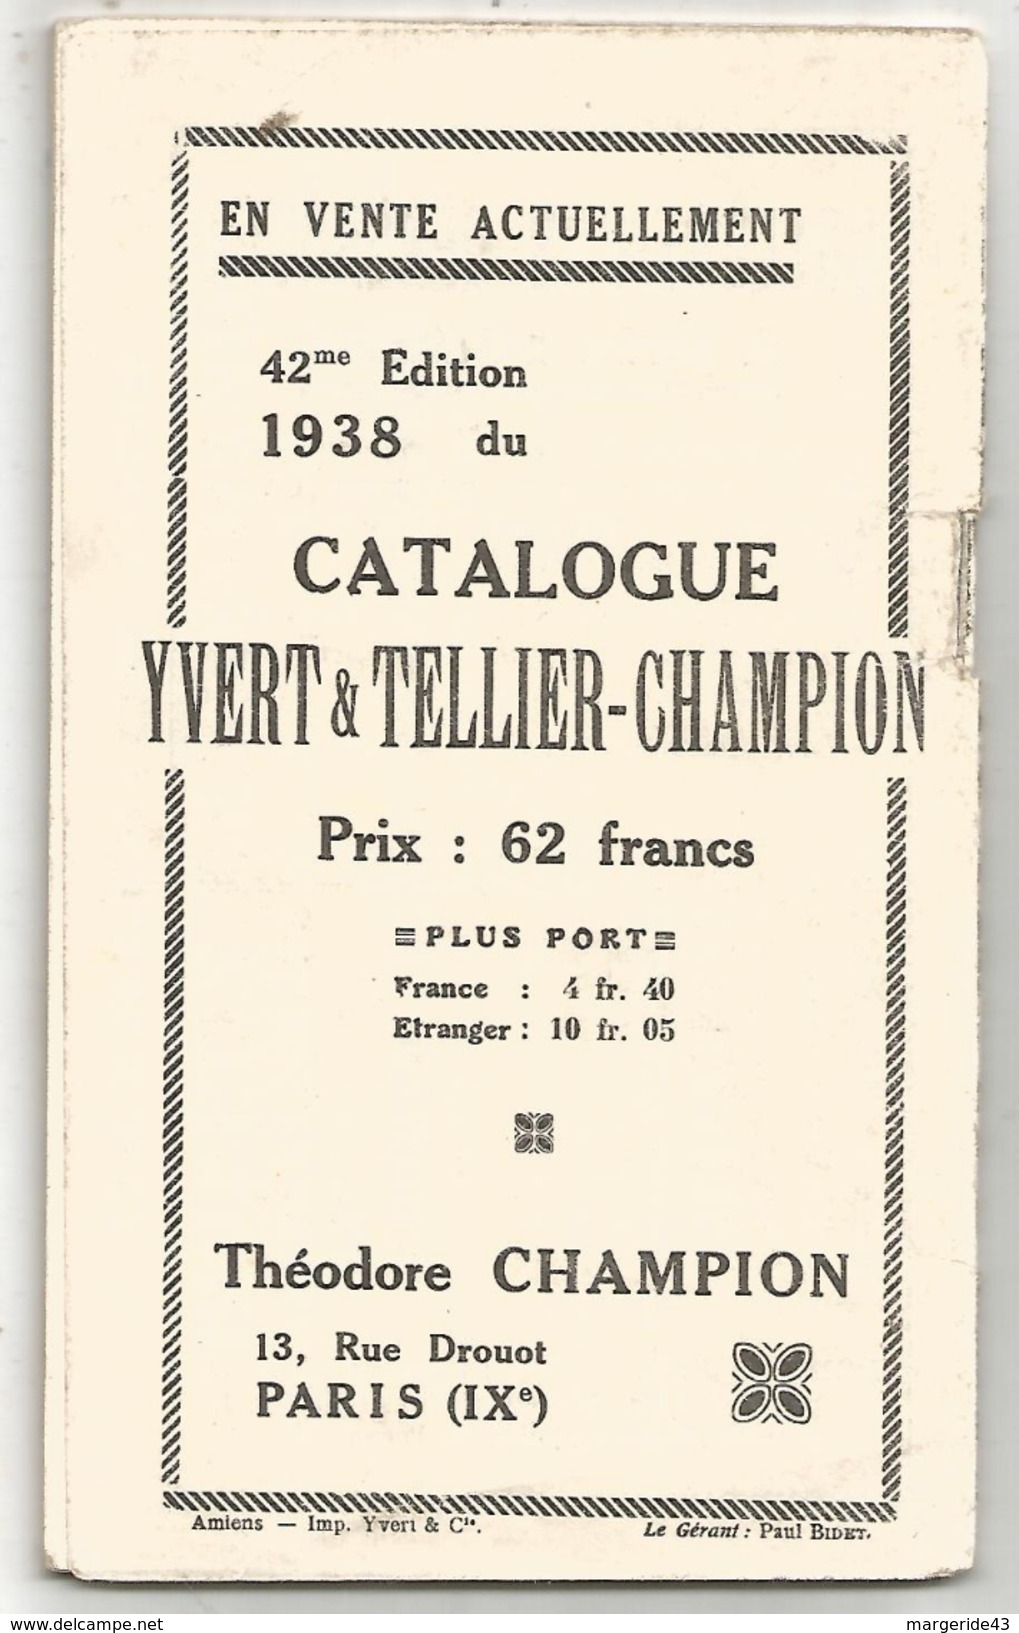 BULLETIN MENSUEL THEODORE CHAMPION - SEPTEMBRE 1937 - Catalogues For Auction Houses